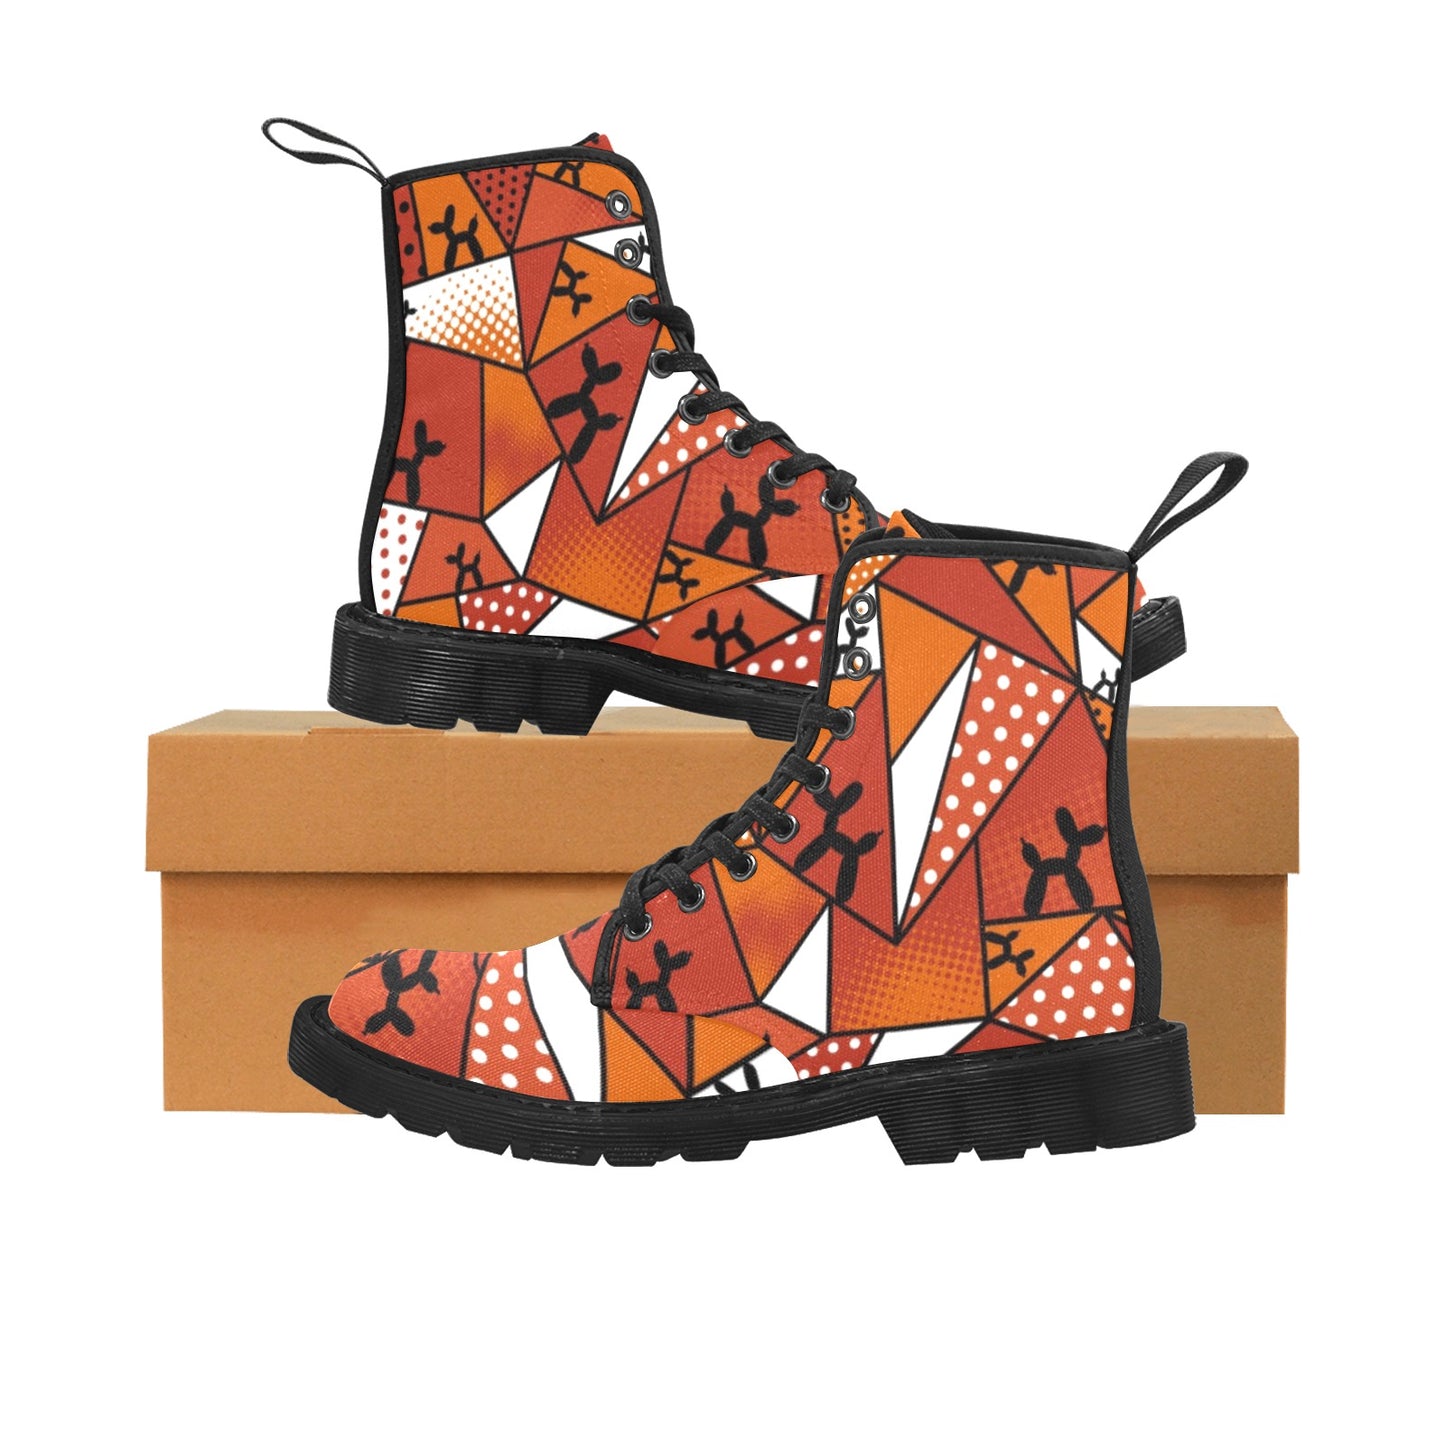 Clown Therapy - Men's Ollie Boots